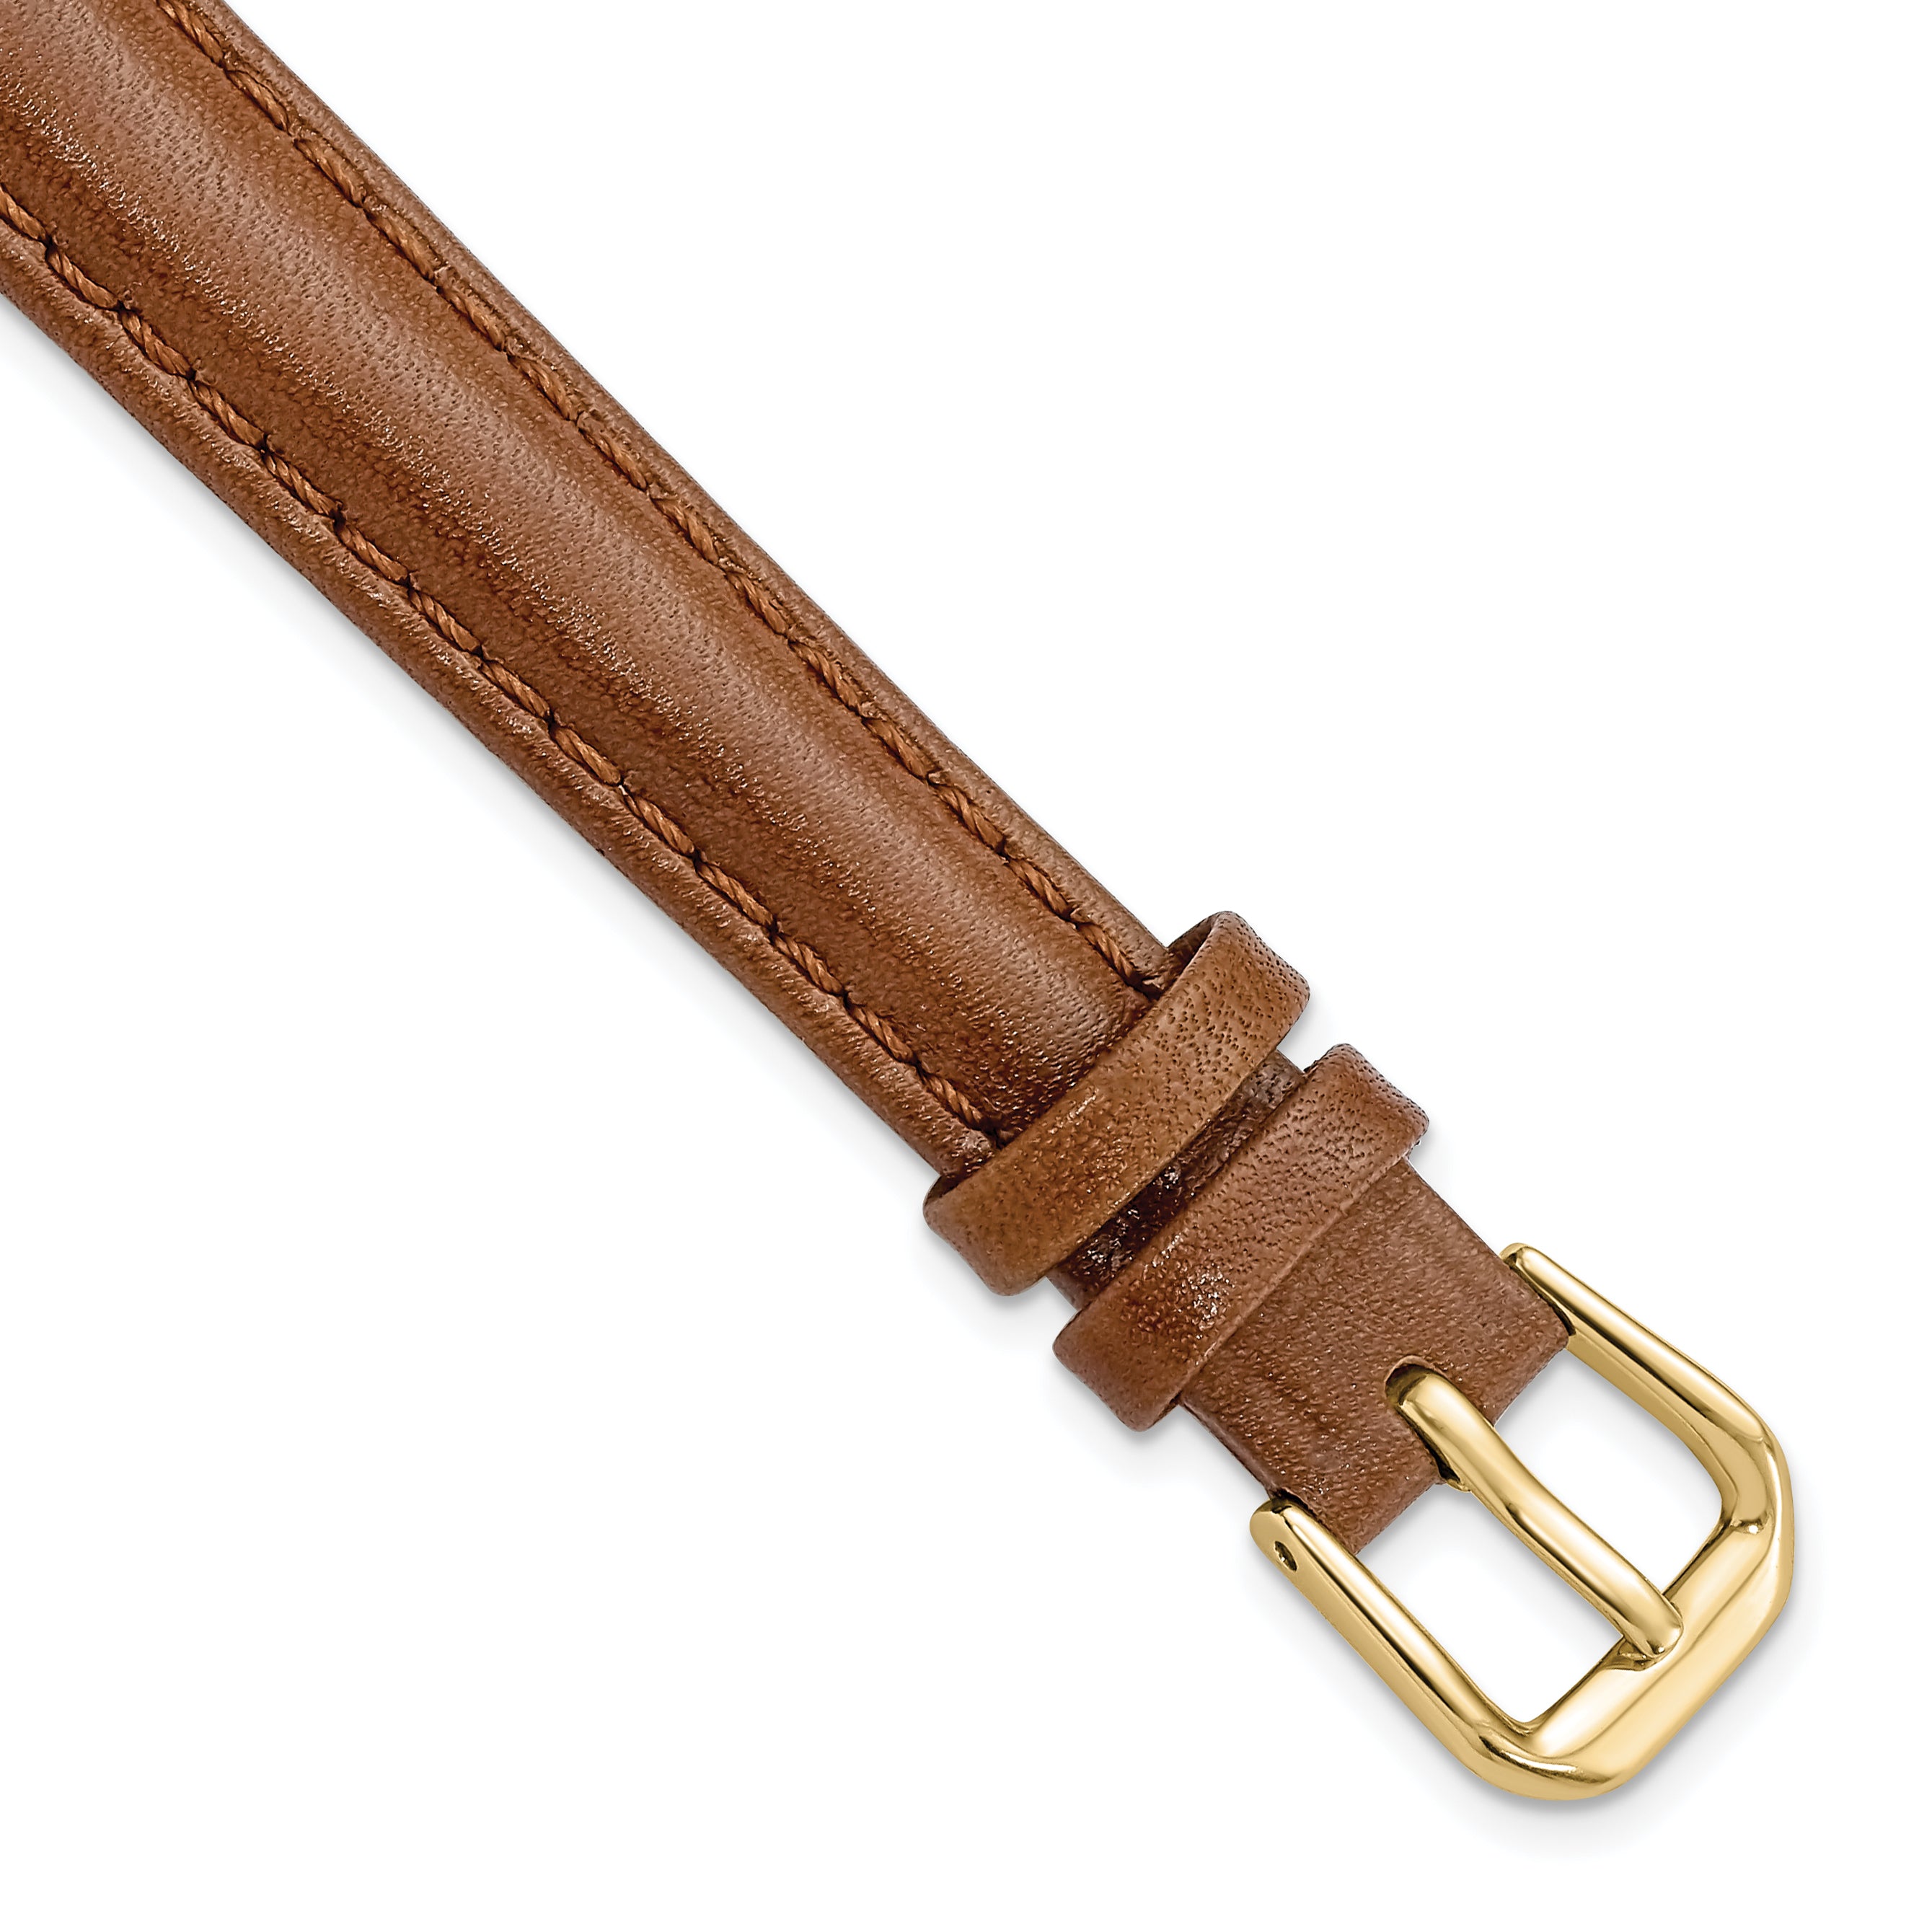 DeBeer 12mm Havana Smooth Leather with Gold-tone Buckle 6.75 inch Watch Band